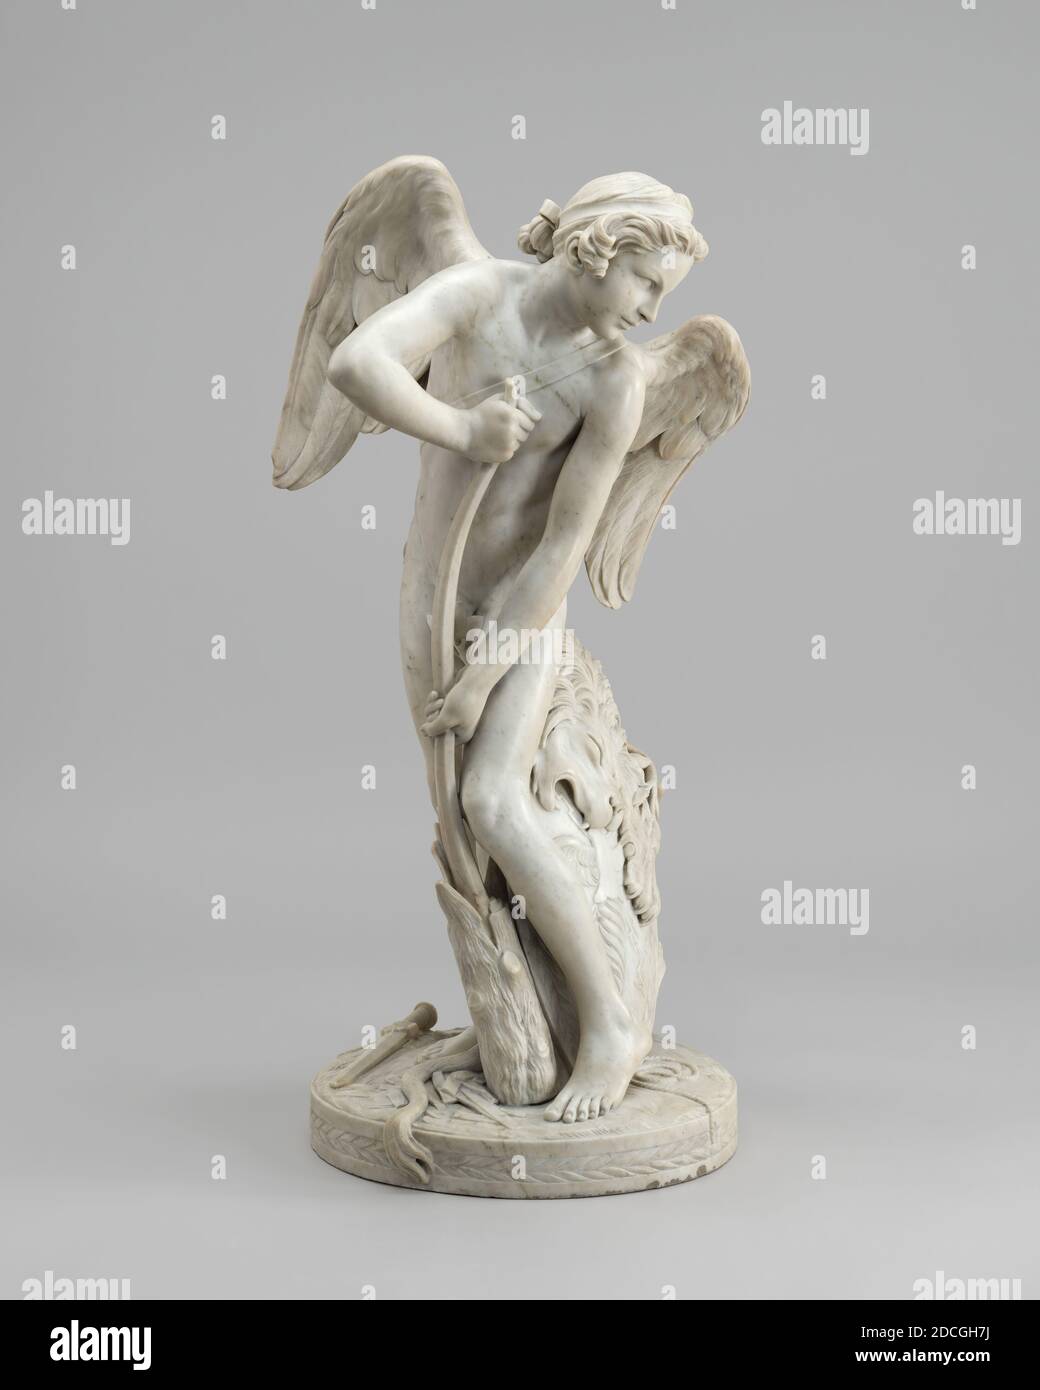 Edme Bouchardon, (artist), French, 1698 - 1762, Cupid, 1744, marble, overall: 74.3 × 35.56 × 31.75 cm (29 1/4 × 14 × 12 1/2 in.), gross weight: 75 lb. (34.02 kg Stock Photo